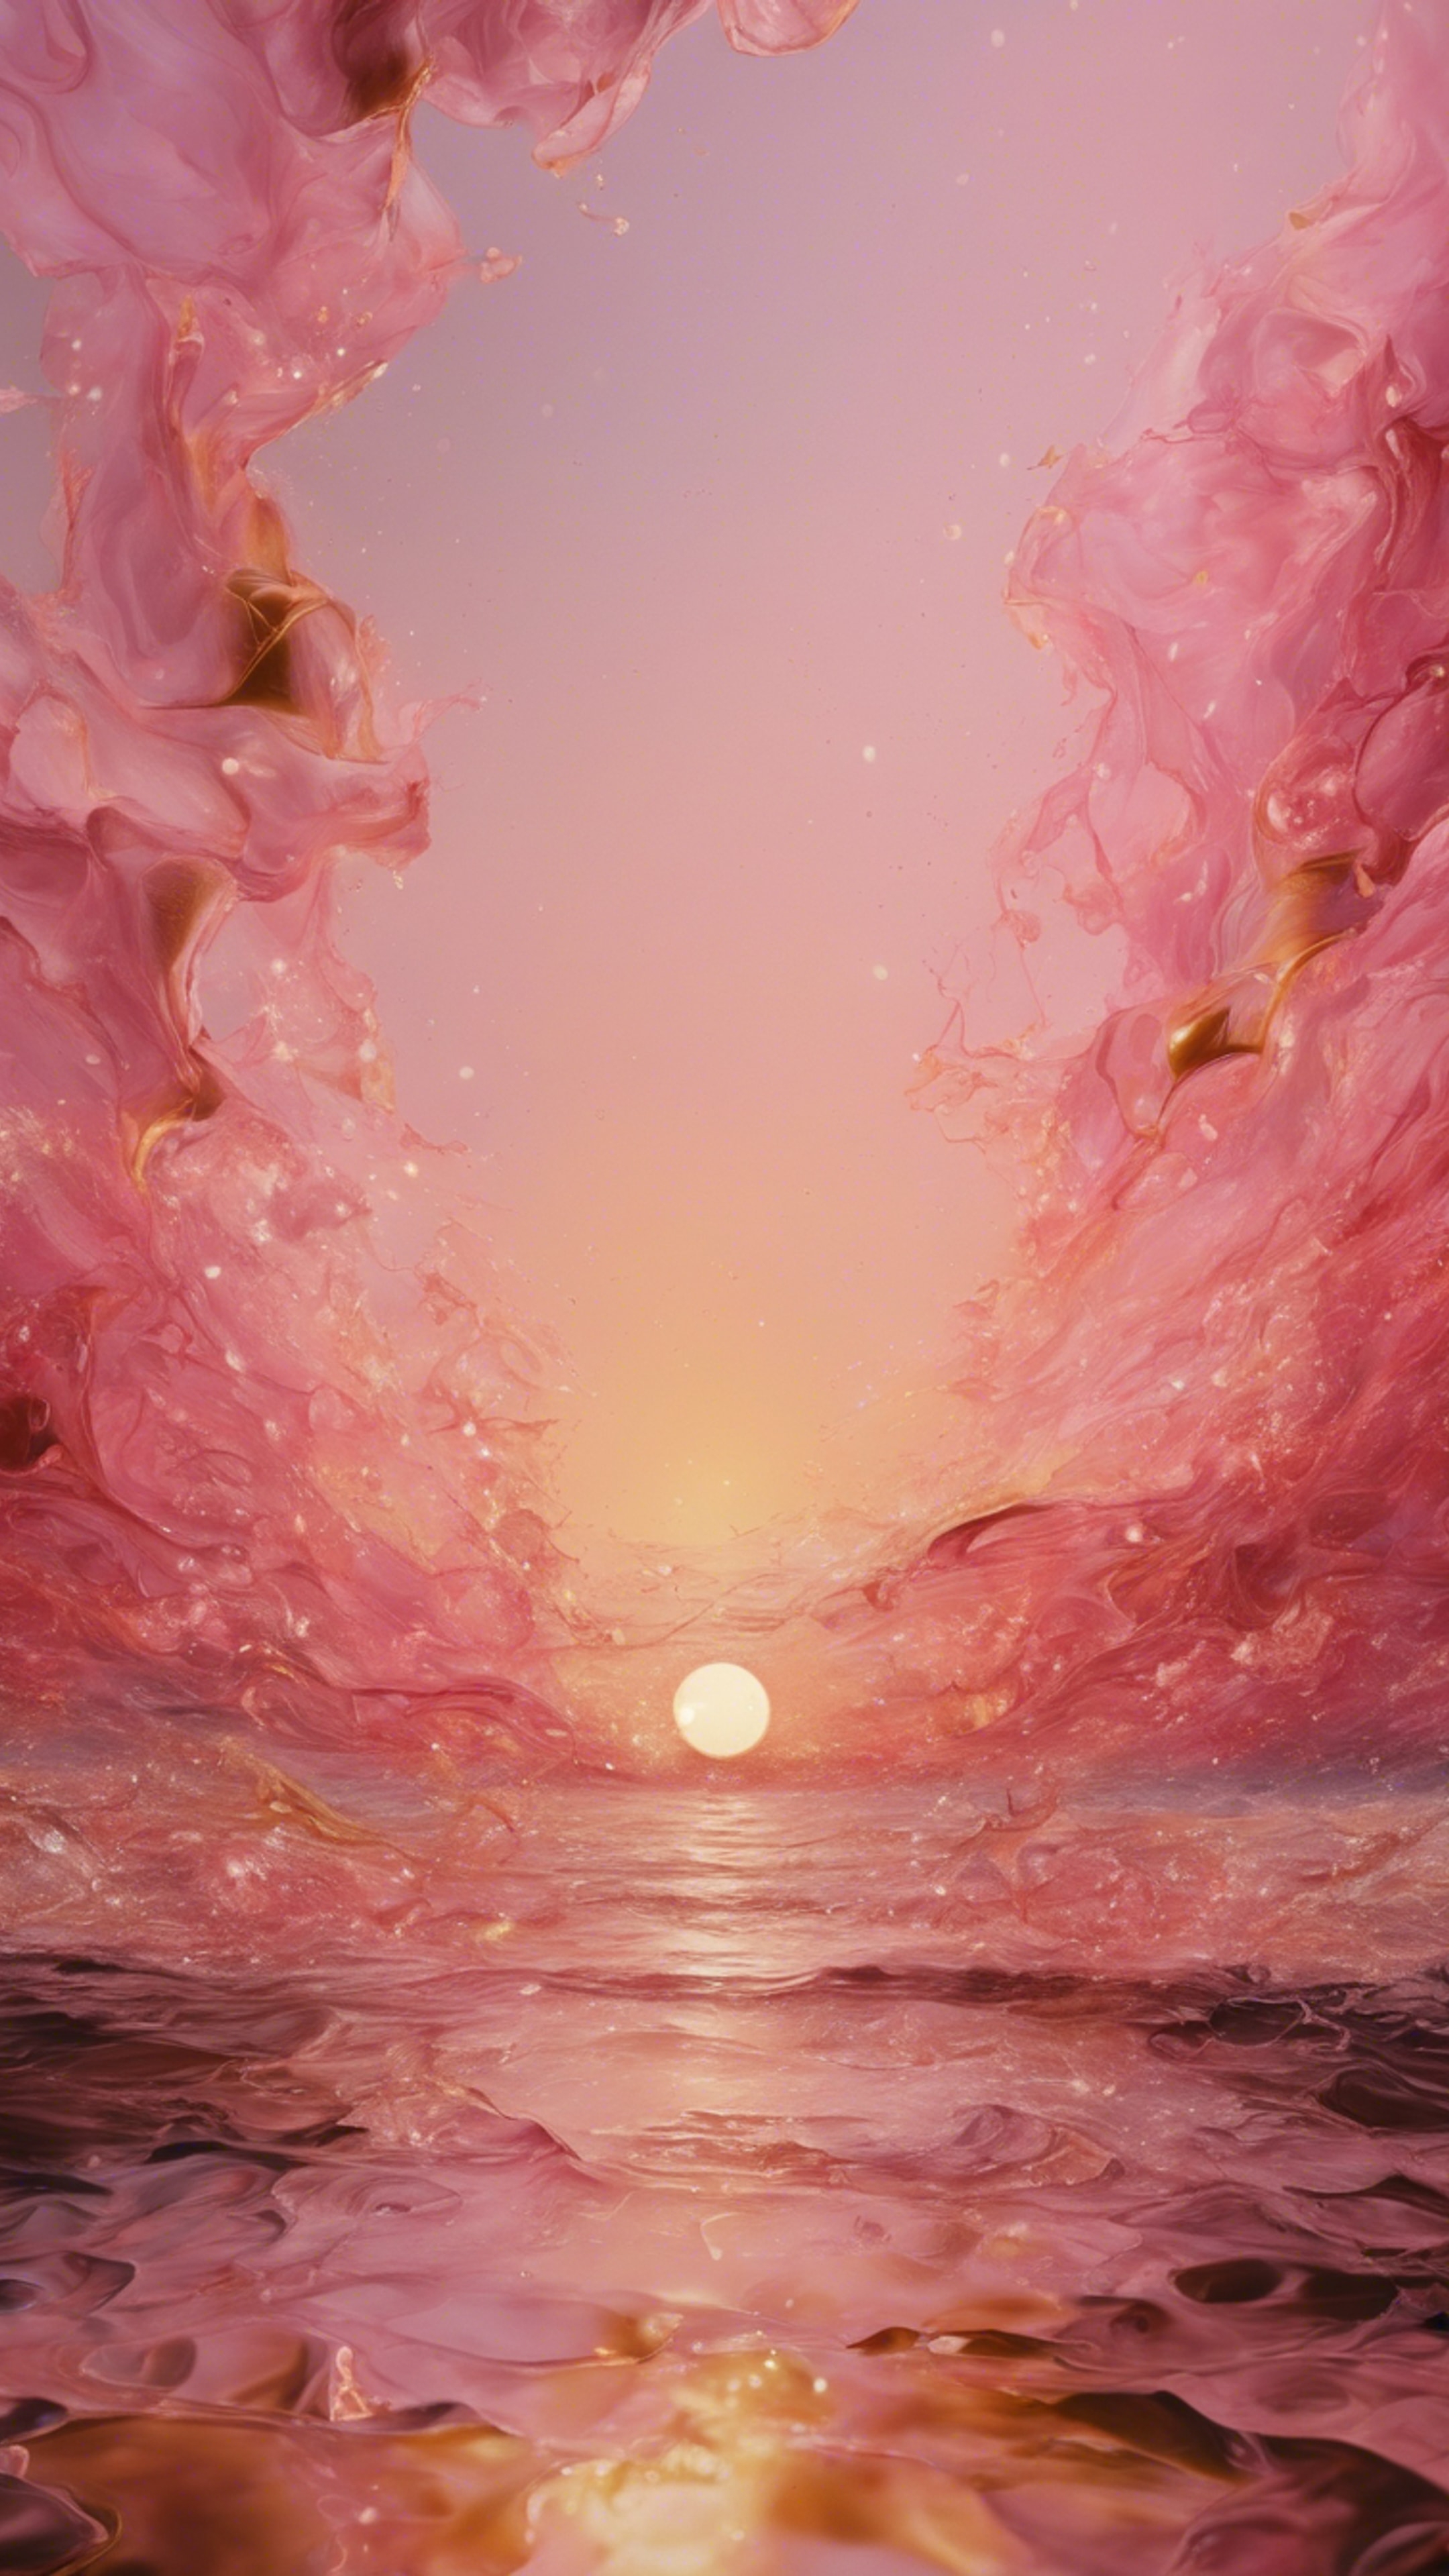 An abstract painting depicting a fusion of rose pink and gold, creating a sunset. วอลล์เปเปอร์[c07a48b6857e4311b231]